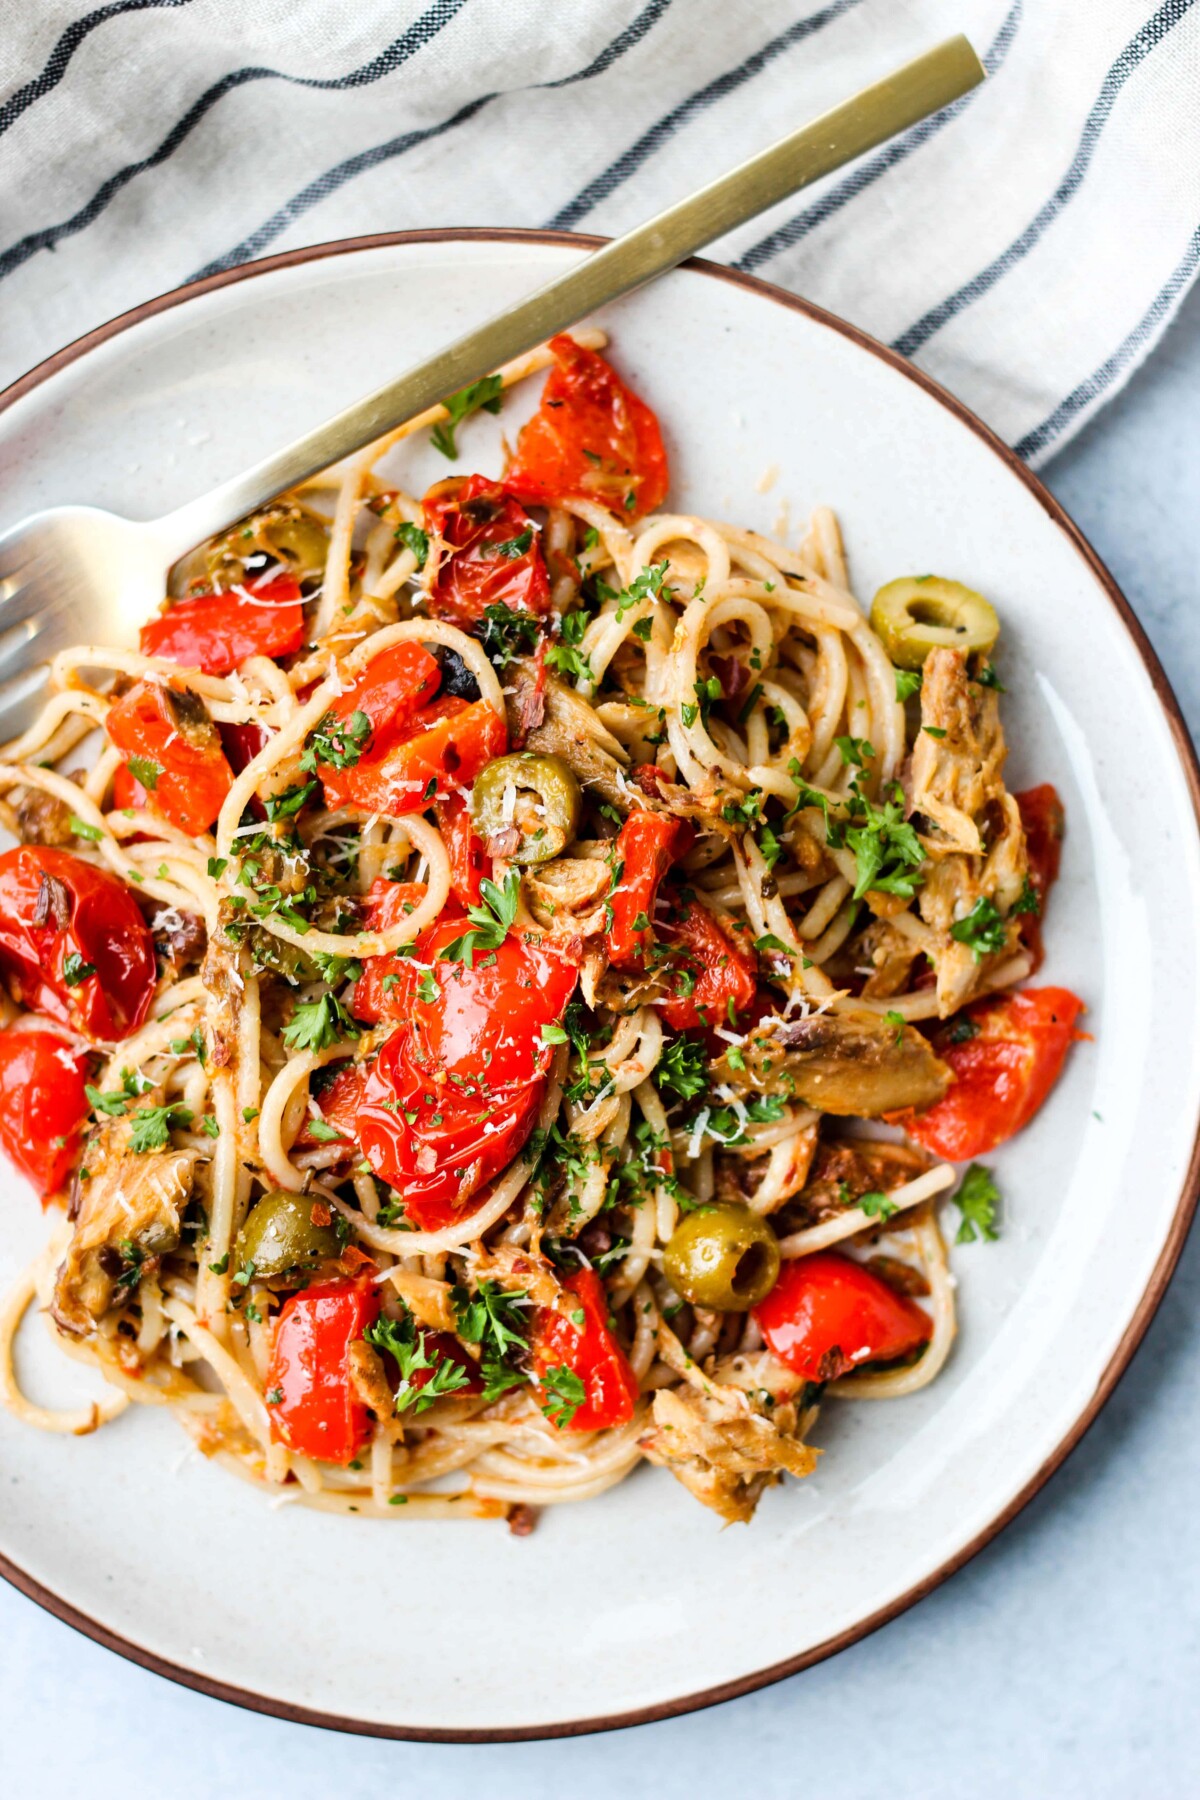 A white plate filled with pasta, canned mackerel, tomatoes, olives, and fresh parsley, with a gold fork on the side.